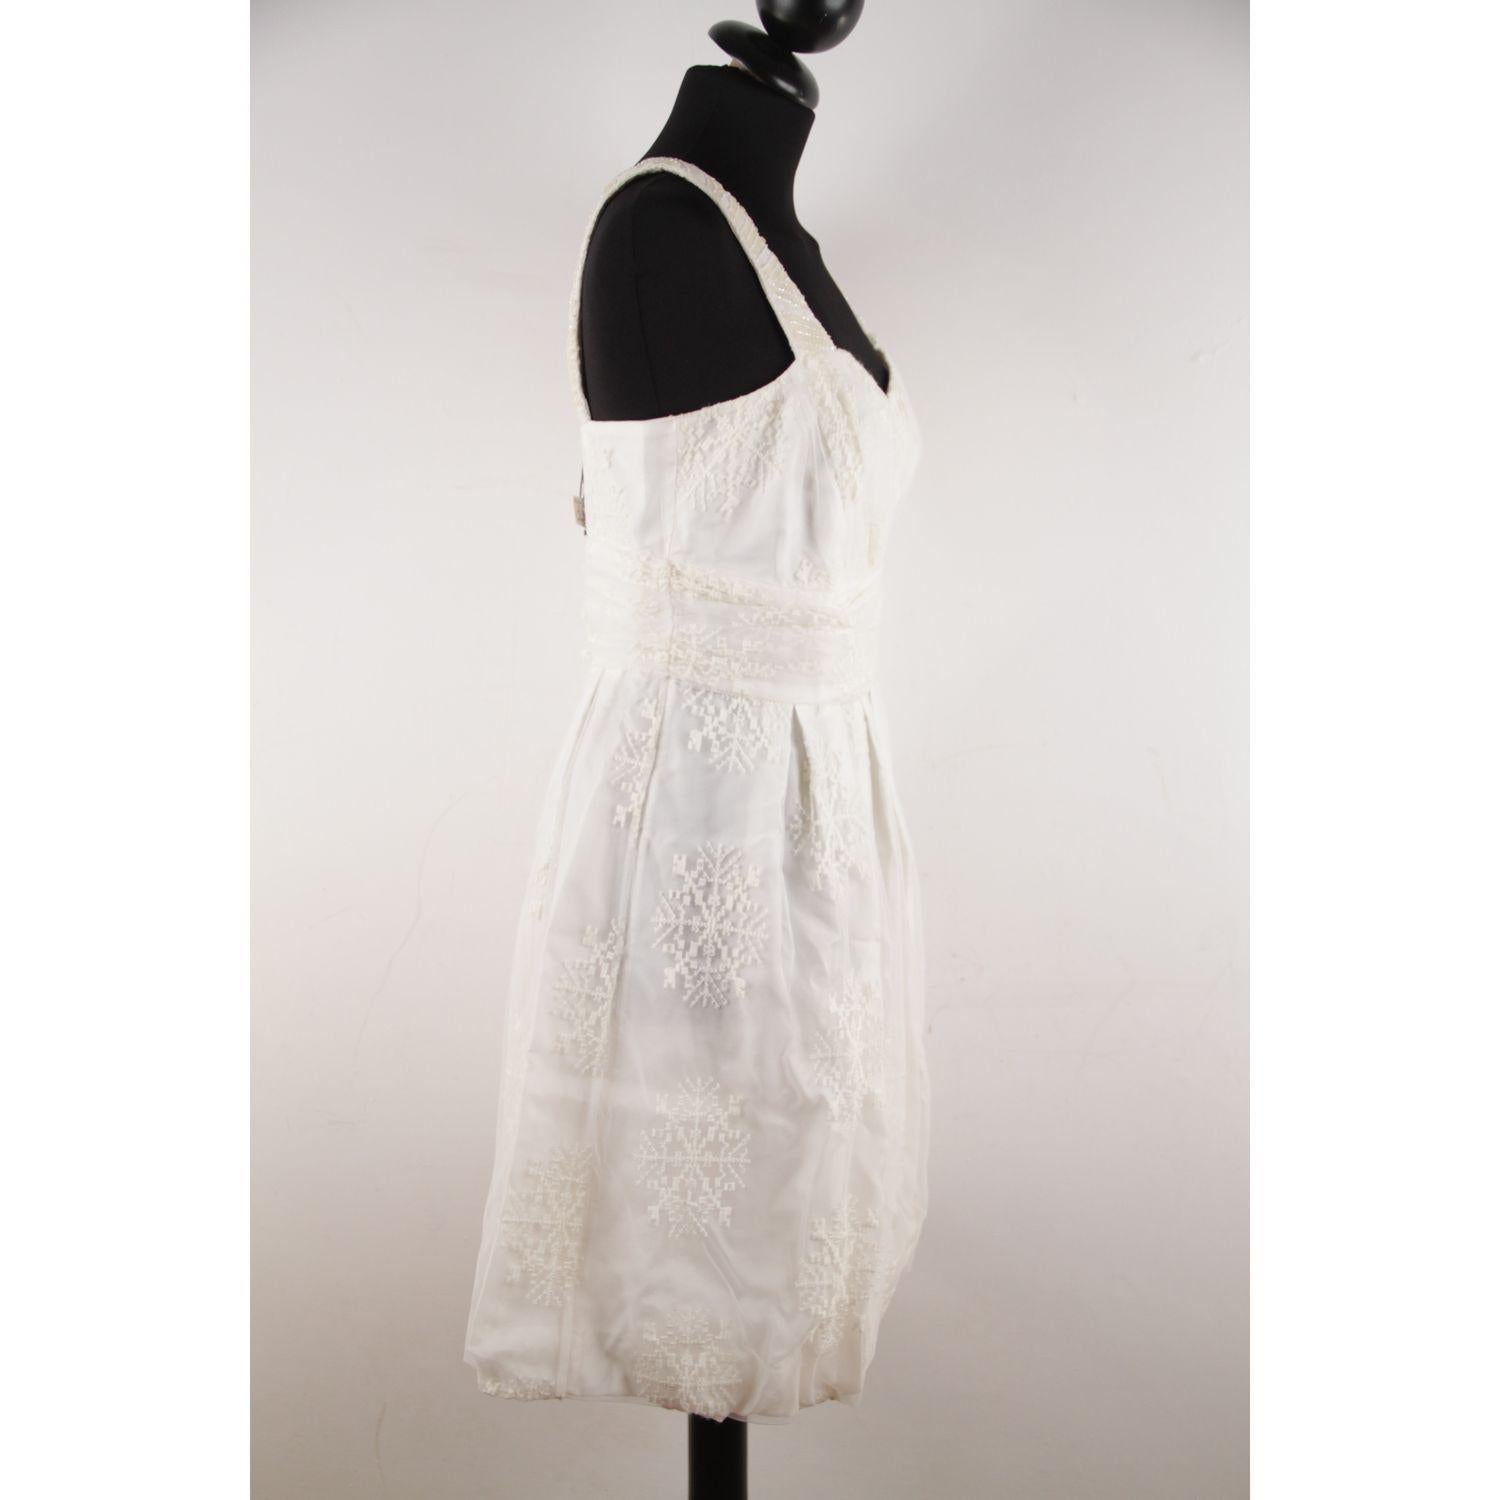 MATERIAL: 60% Nylon, 35% Wool, 5% Cotton COLOR: White MODEL: Skater GENDER: Women SIZE: Small COUNTRY OF MANUFACTURE: Italy Condition CONDITION DETAILS: A :EXCELLENT CONDITION - Used once or twice. Looks mint. Imperceptible signs of wear may be